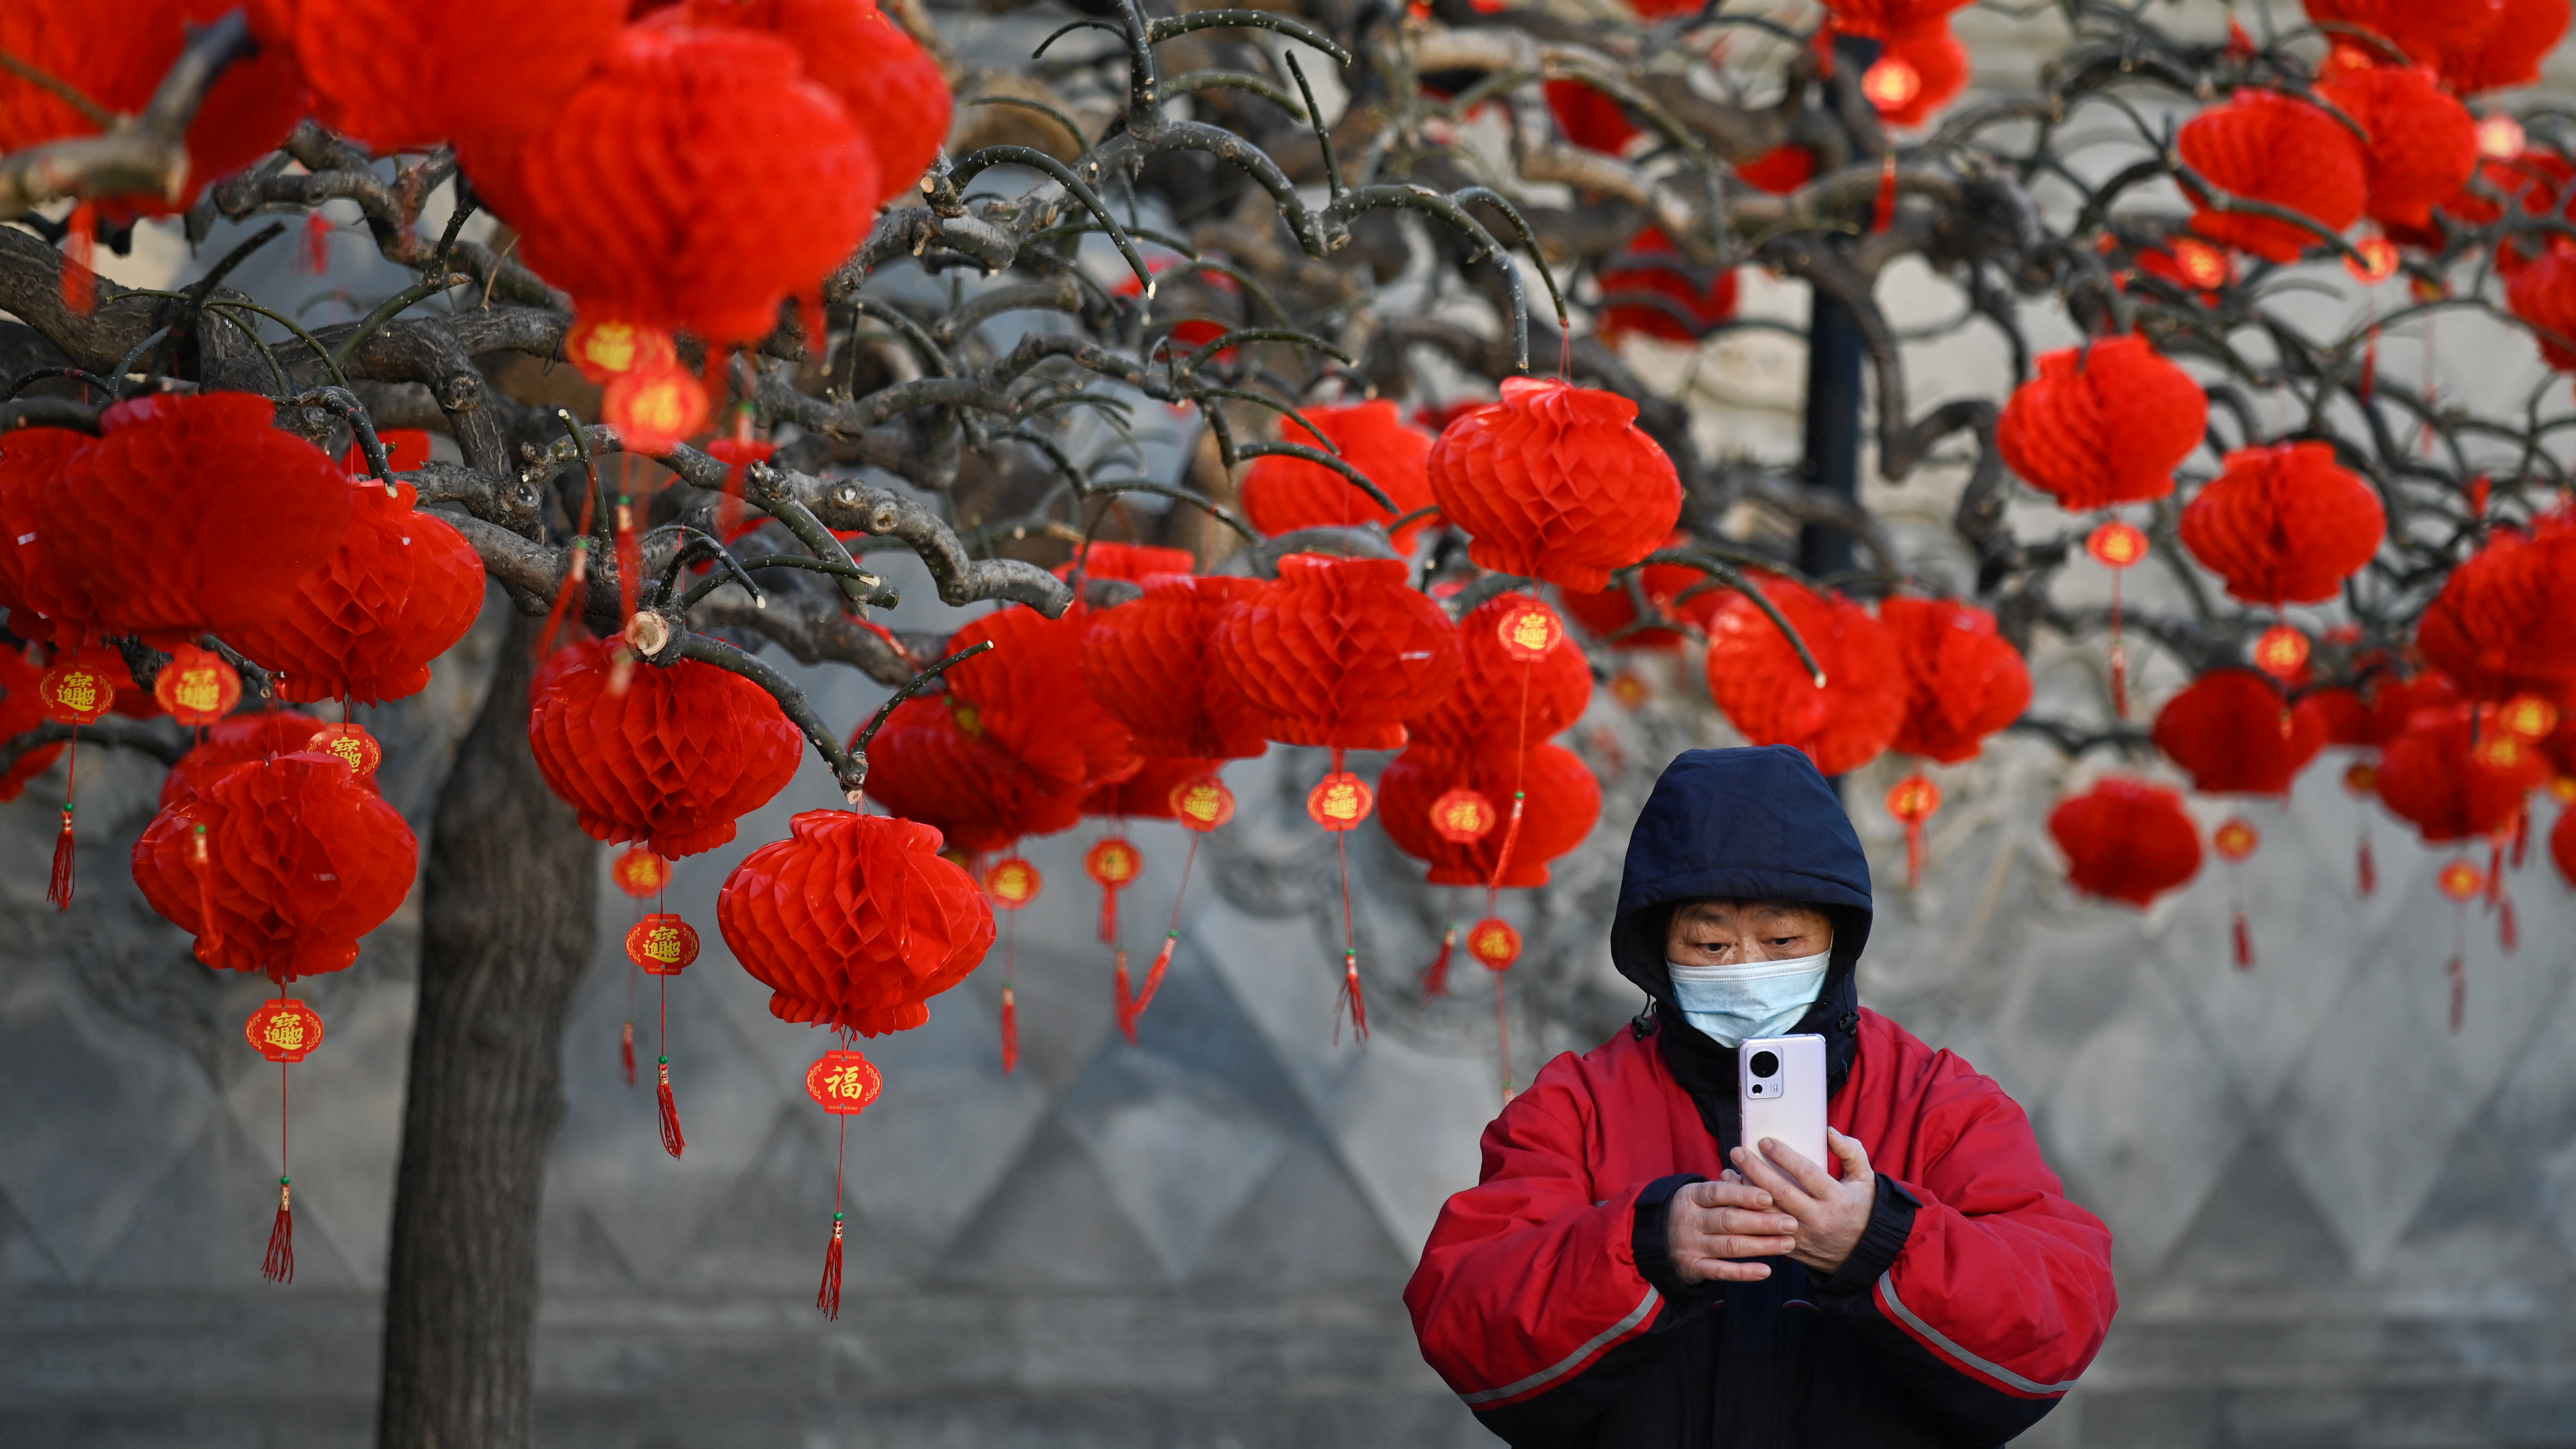 A woman takes a picture next a tree illustrated by paper lanterns at the entrance of a park during Chinese lunar new year in Beijing on January 26, 2023. /Wang Zhao/AFP